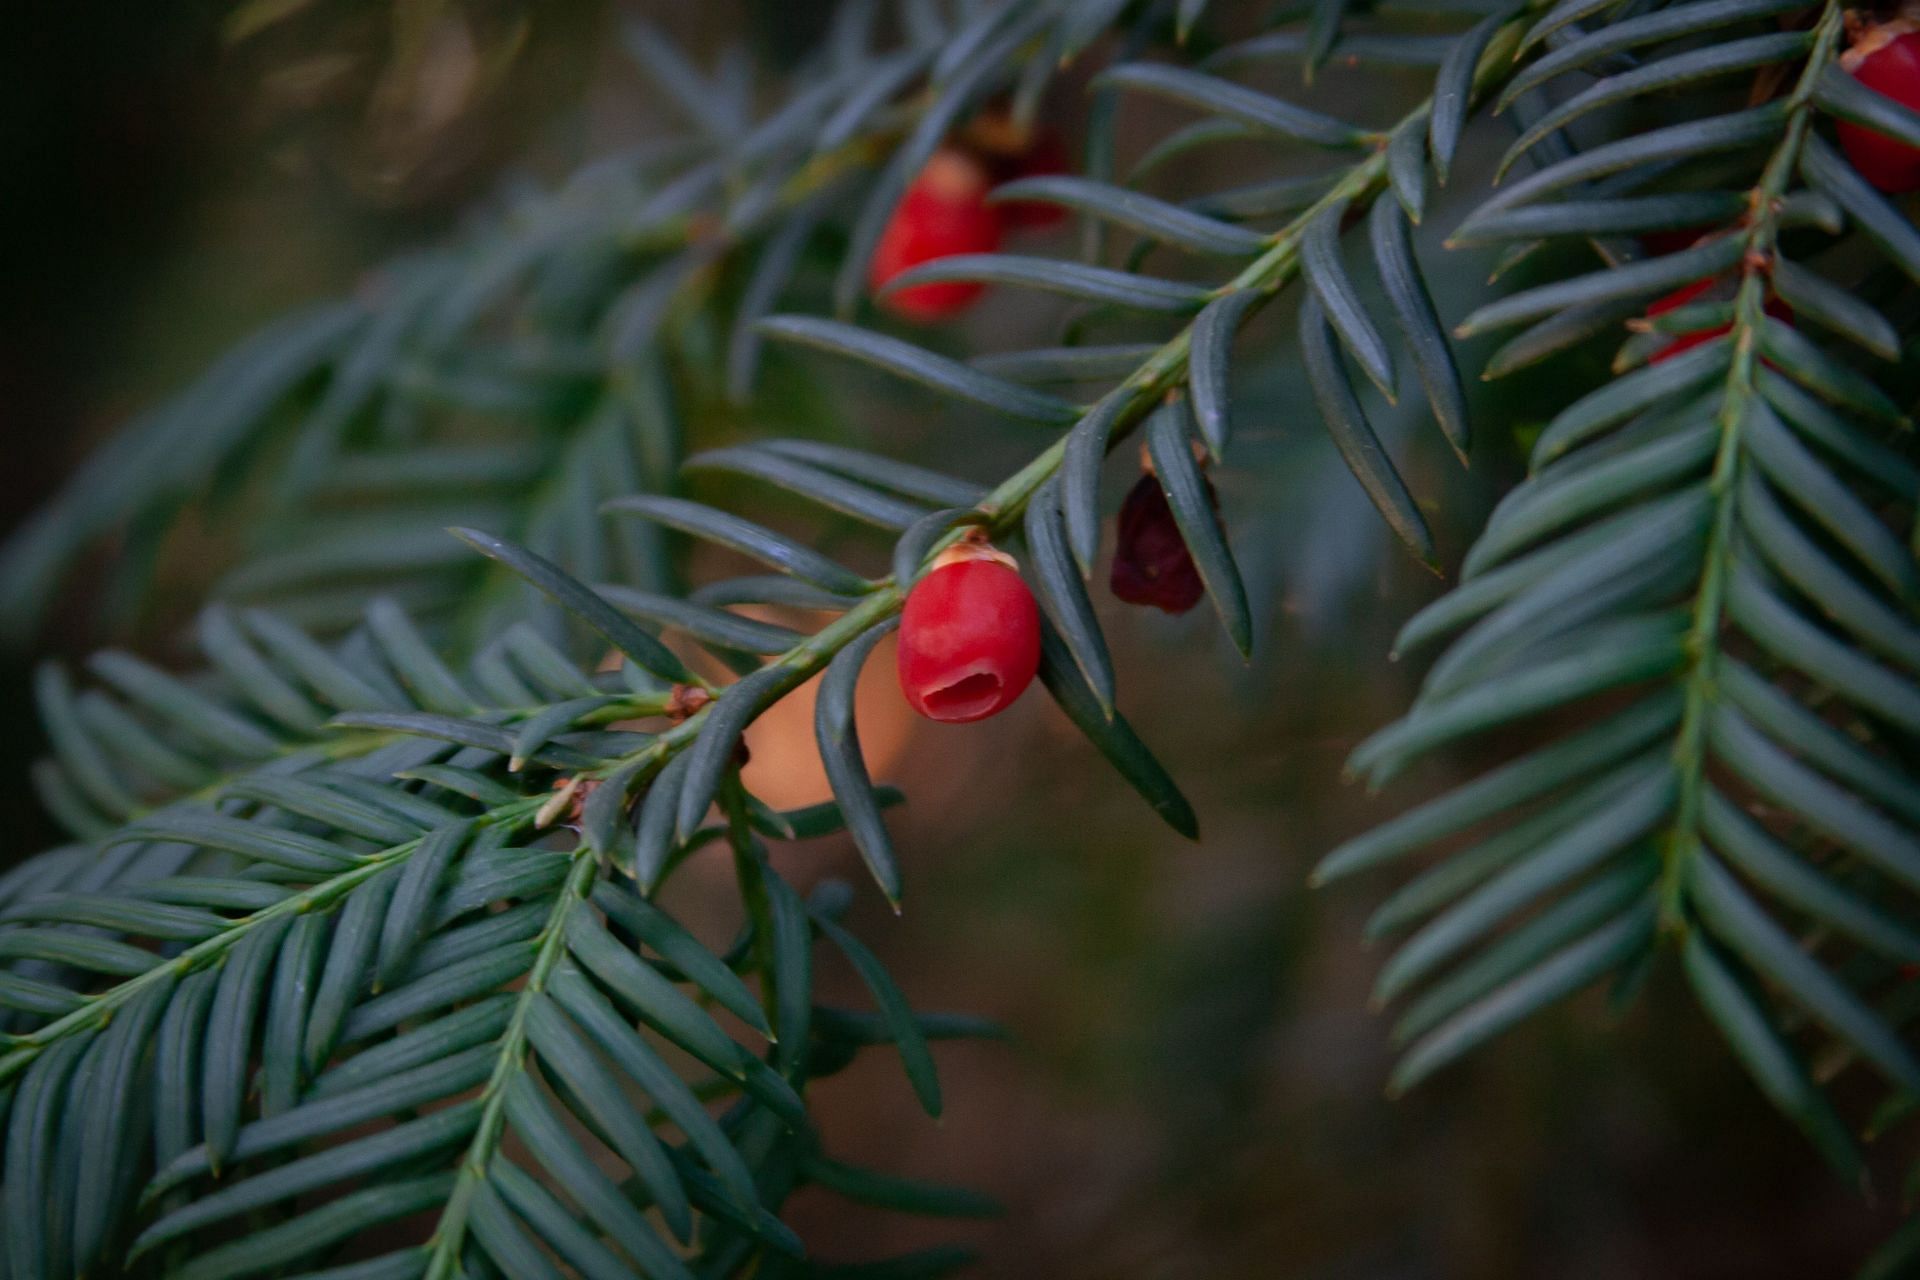 Yew berries are also among the mildly poisonous fruits. (Image via Unsplash/Adel Grober)